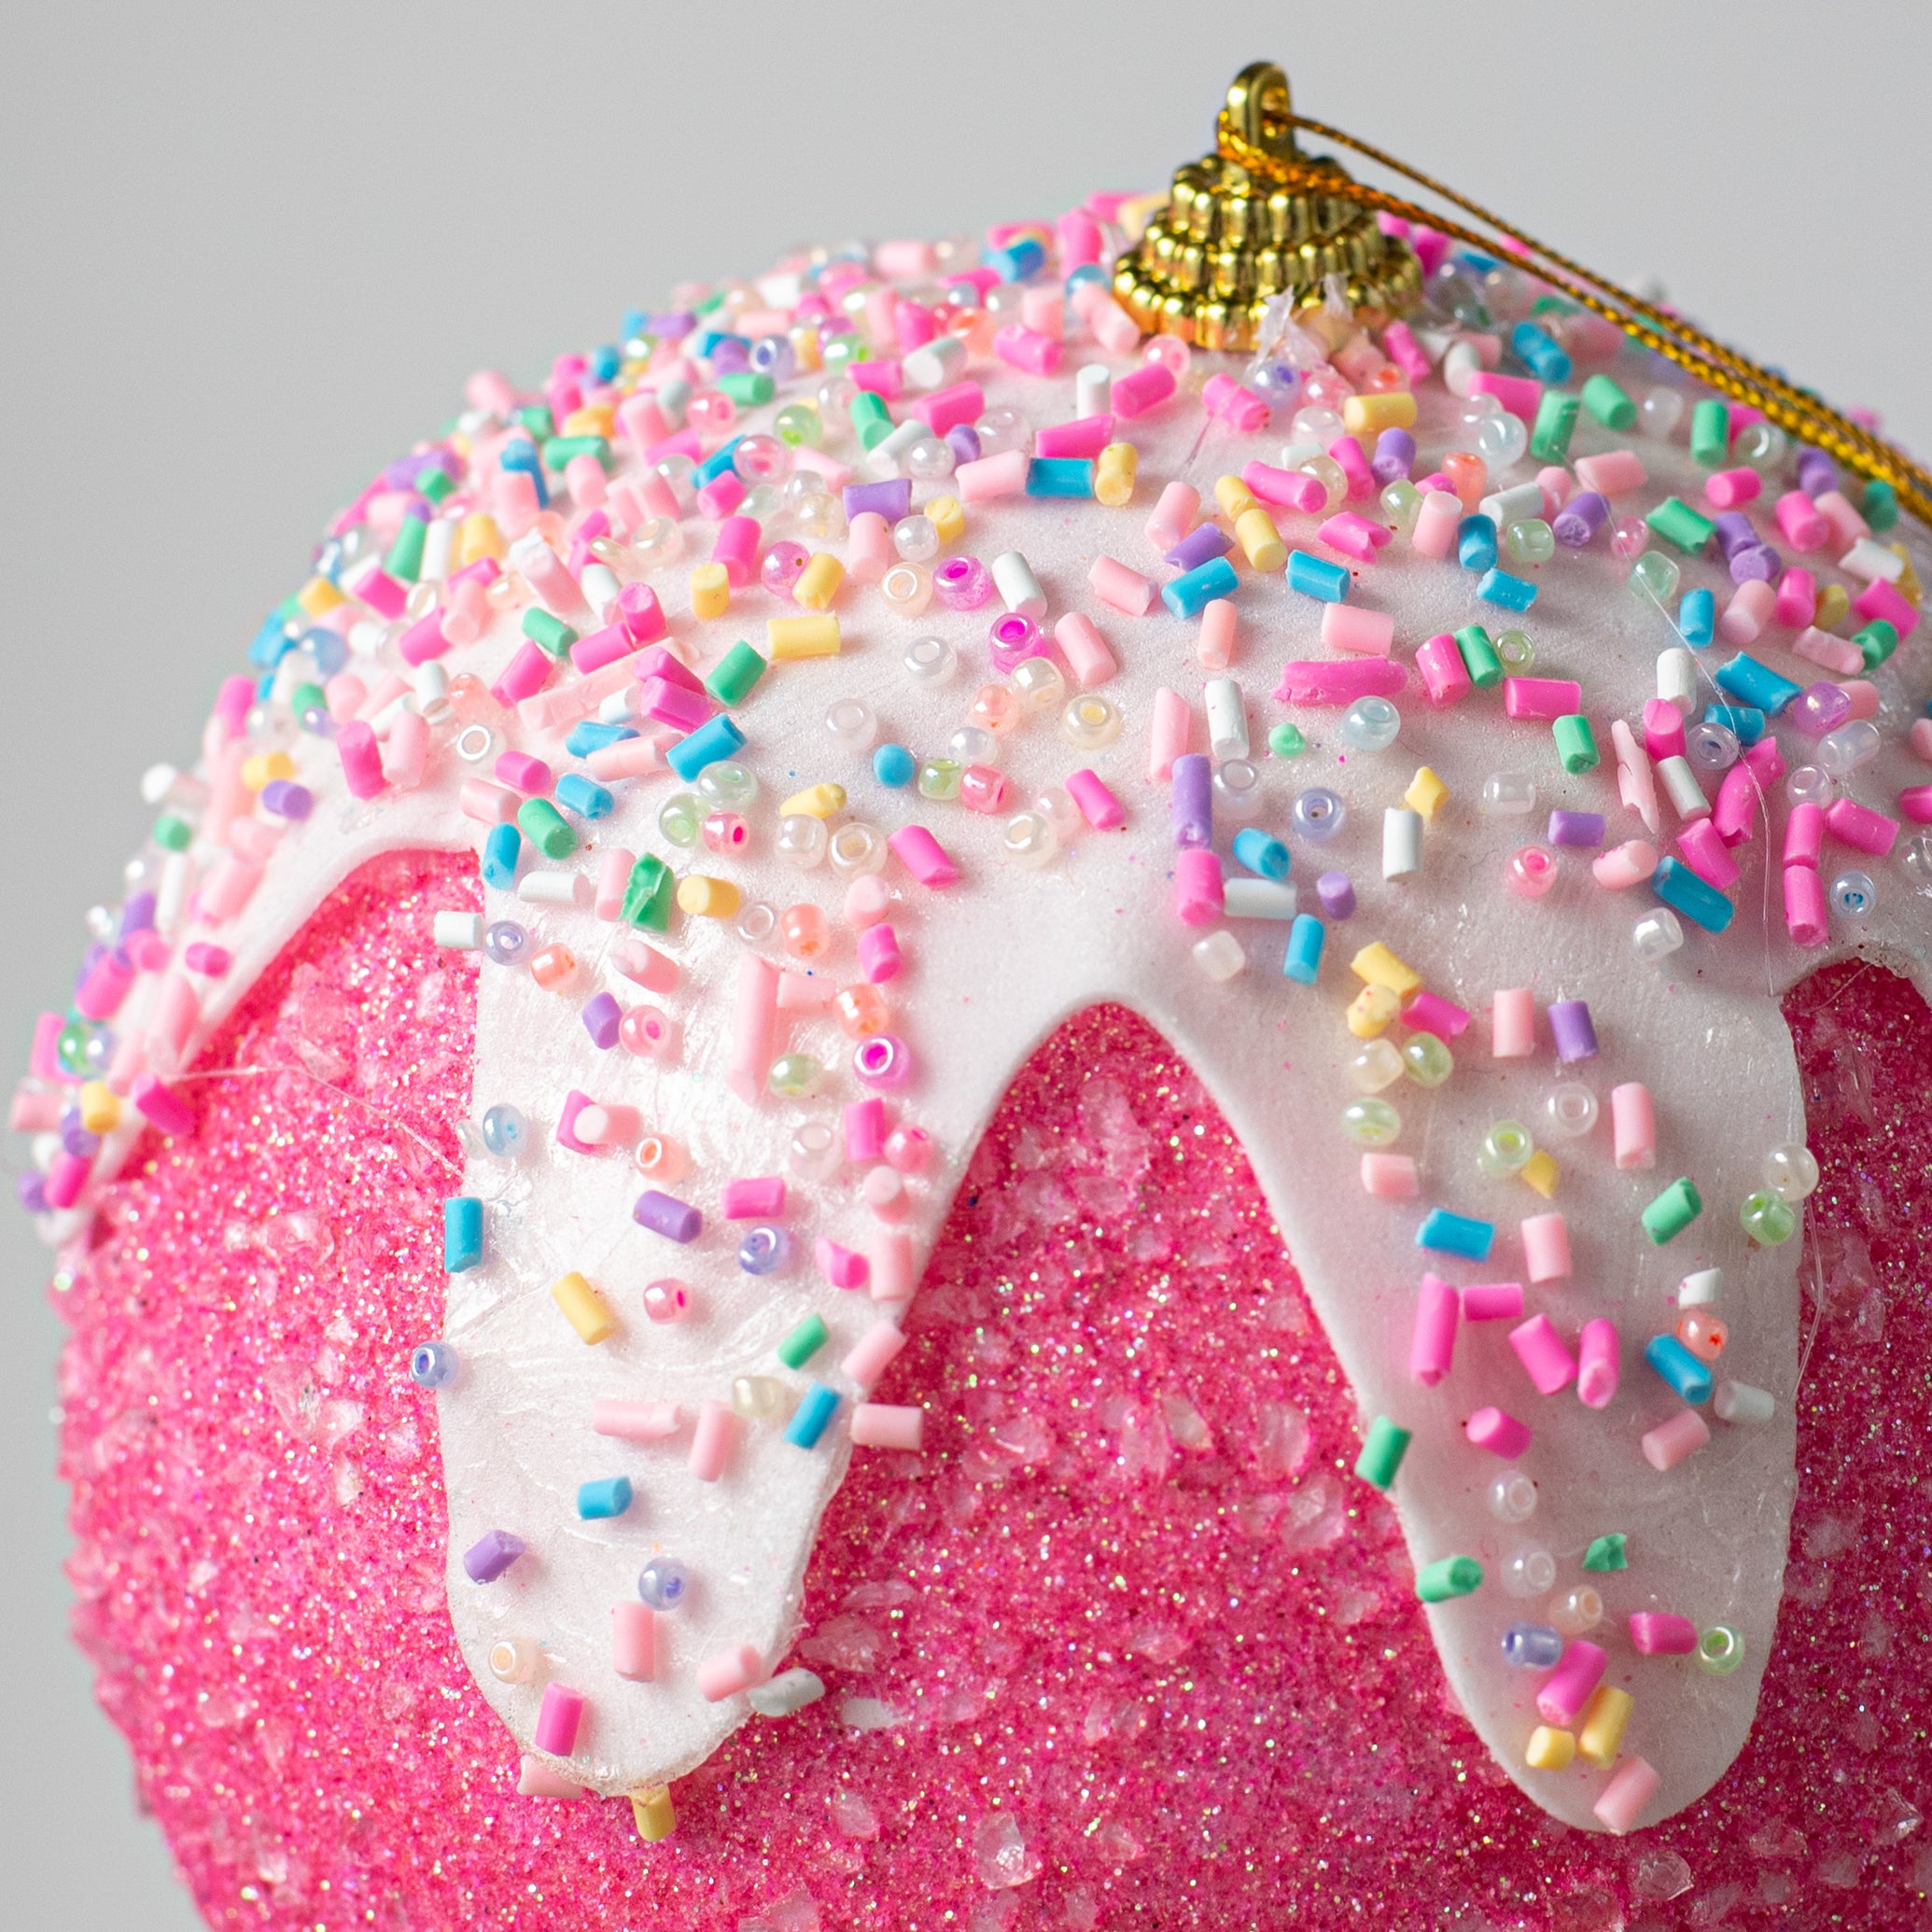 5" Sprinkles & Dipped Ball Ornament: Fuchsia Pink